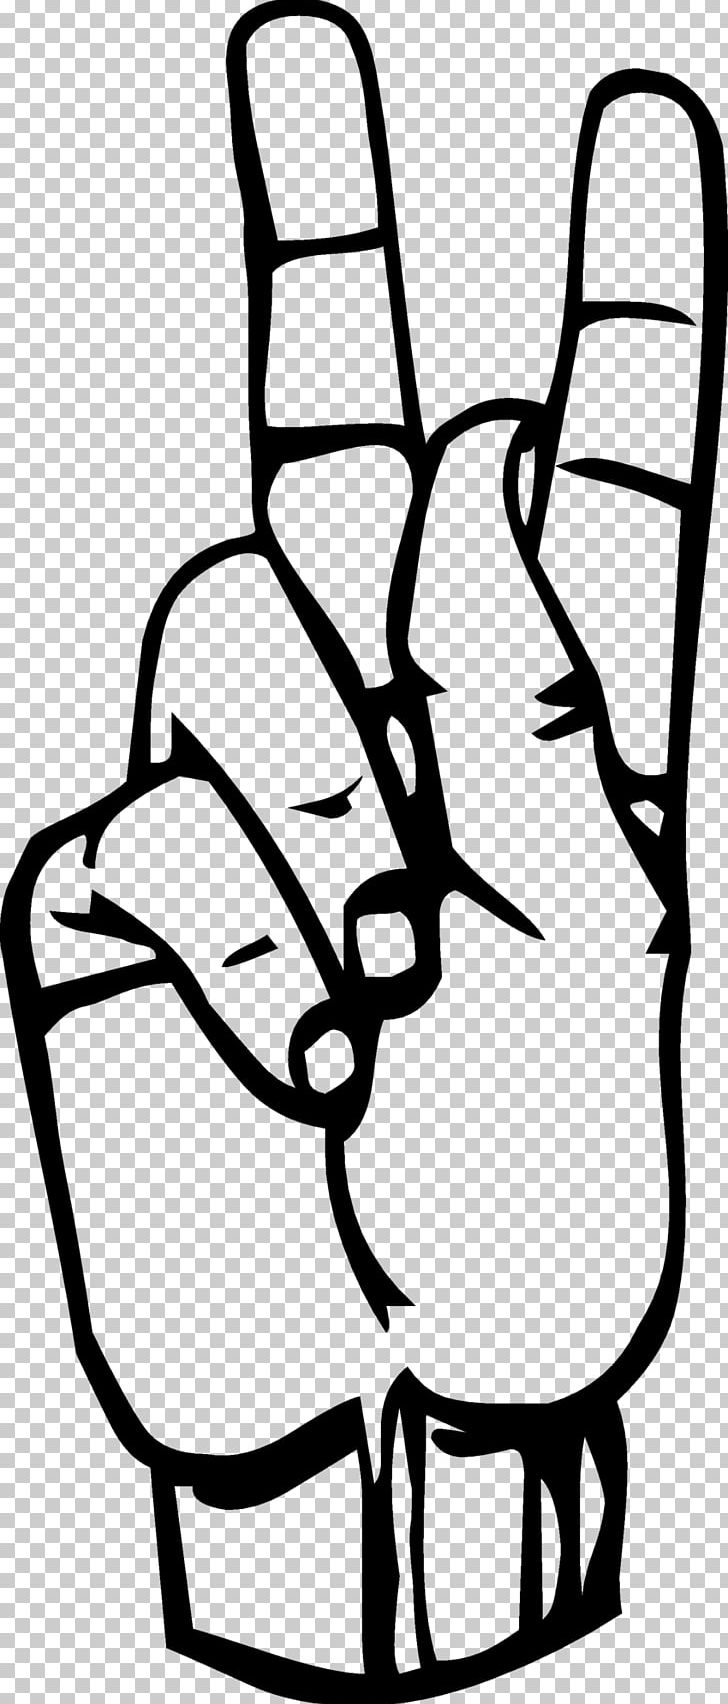 American Sign Language K Fingerspelling PNG, Clipart, Area, Arm, Black, Black And White, British Sign Language Free PNG Download